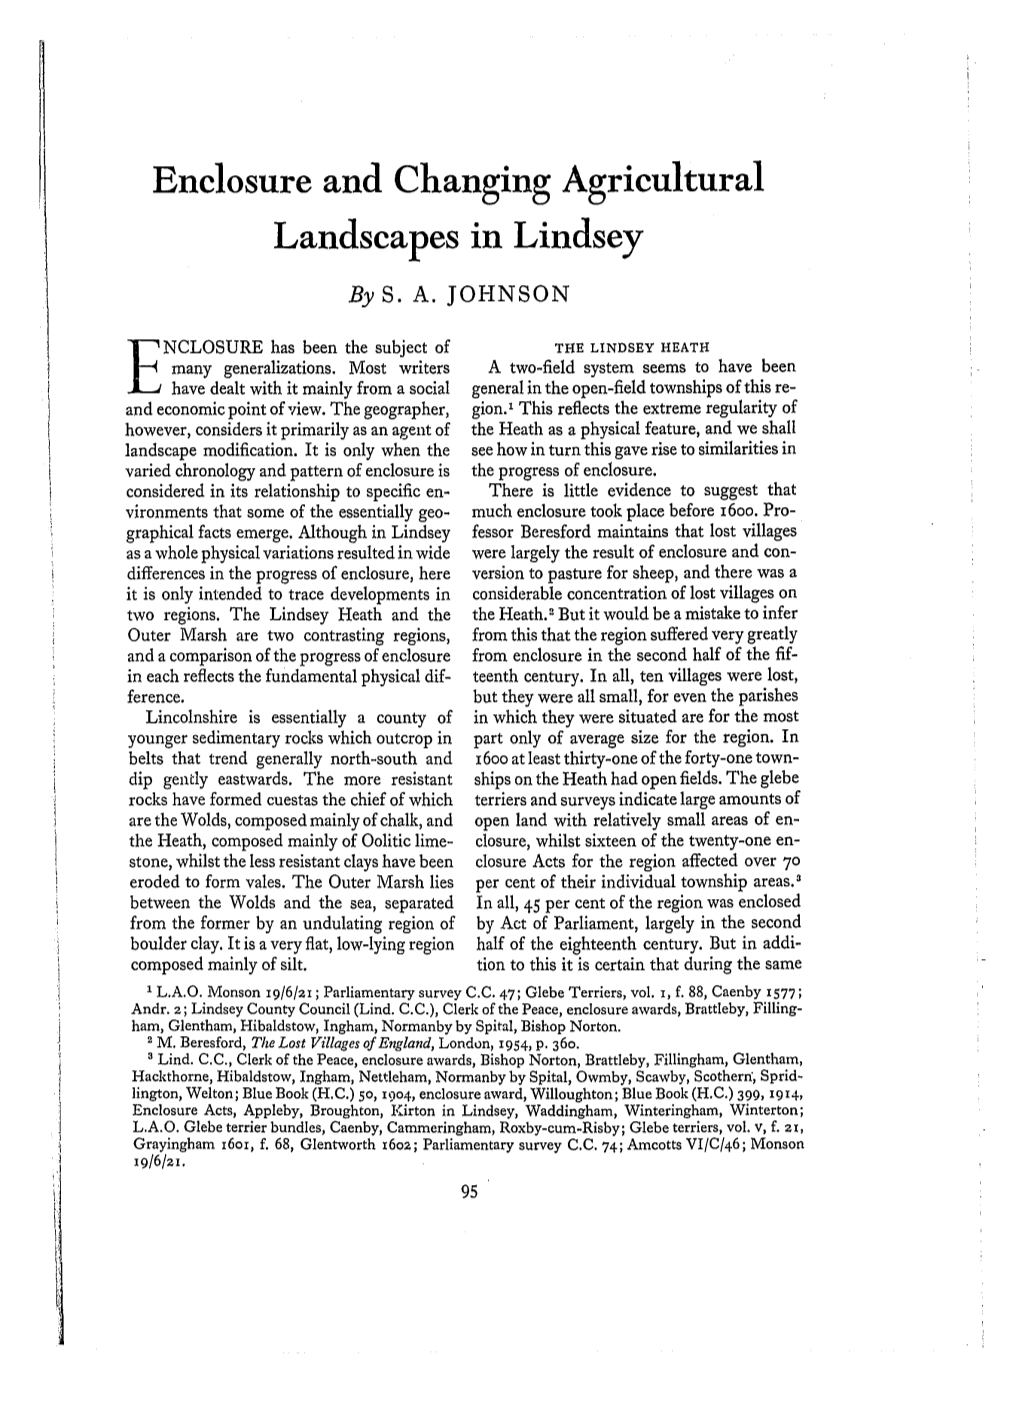 Enclosure and Changing Agricultural Landscapes in Lindsey